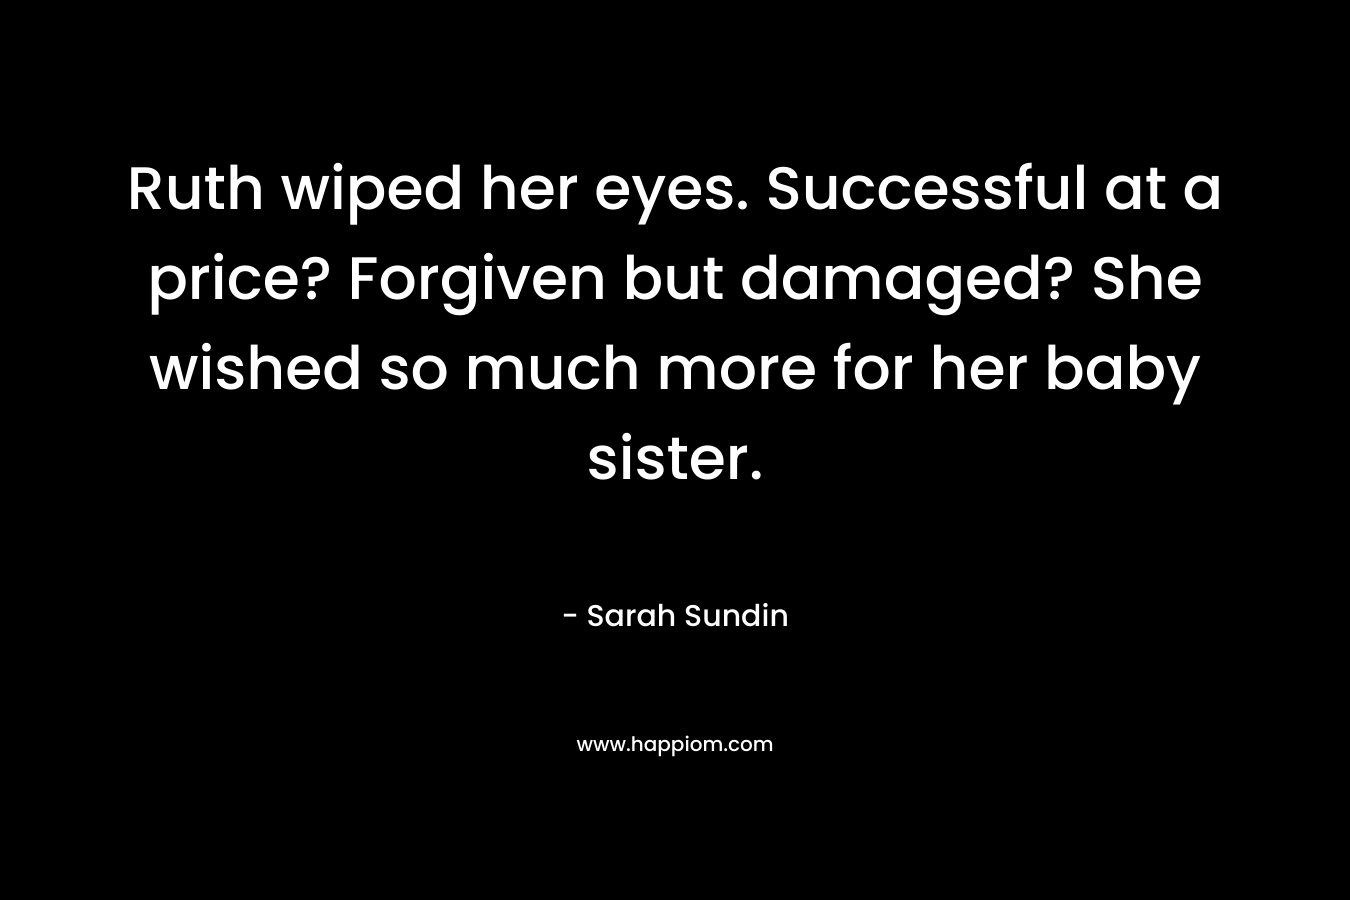 Ruth wiped her eyes. Successful at a price? Forgiven but damaged? She wished so much more for her baby sister.